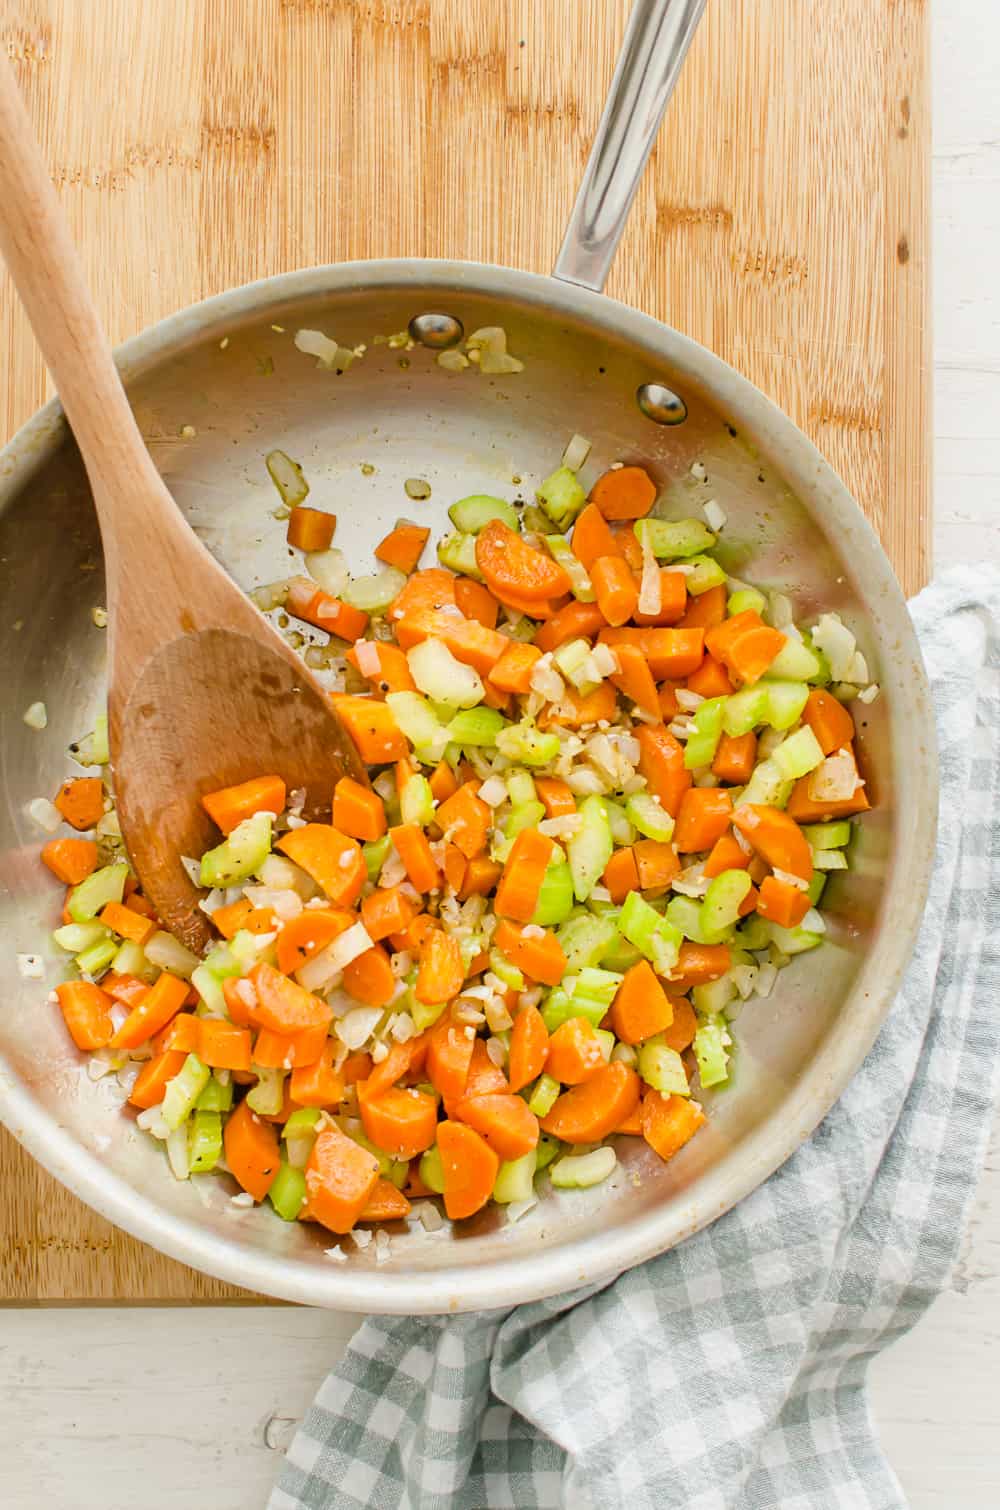 Carrots, celery, onion, and garlic in saute pan.